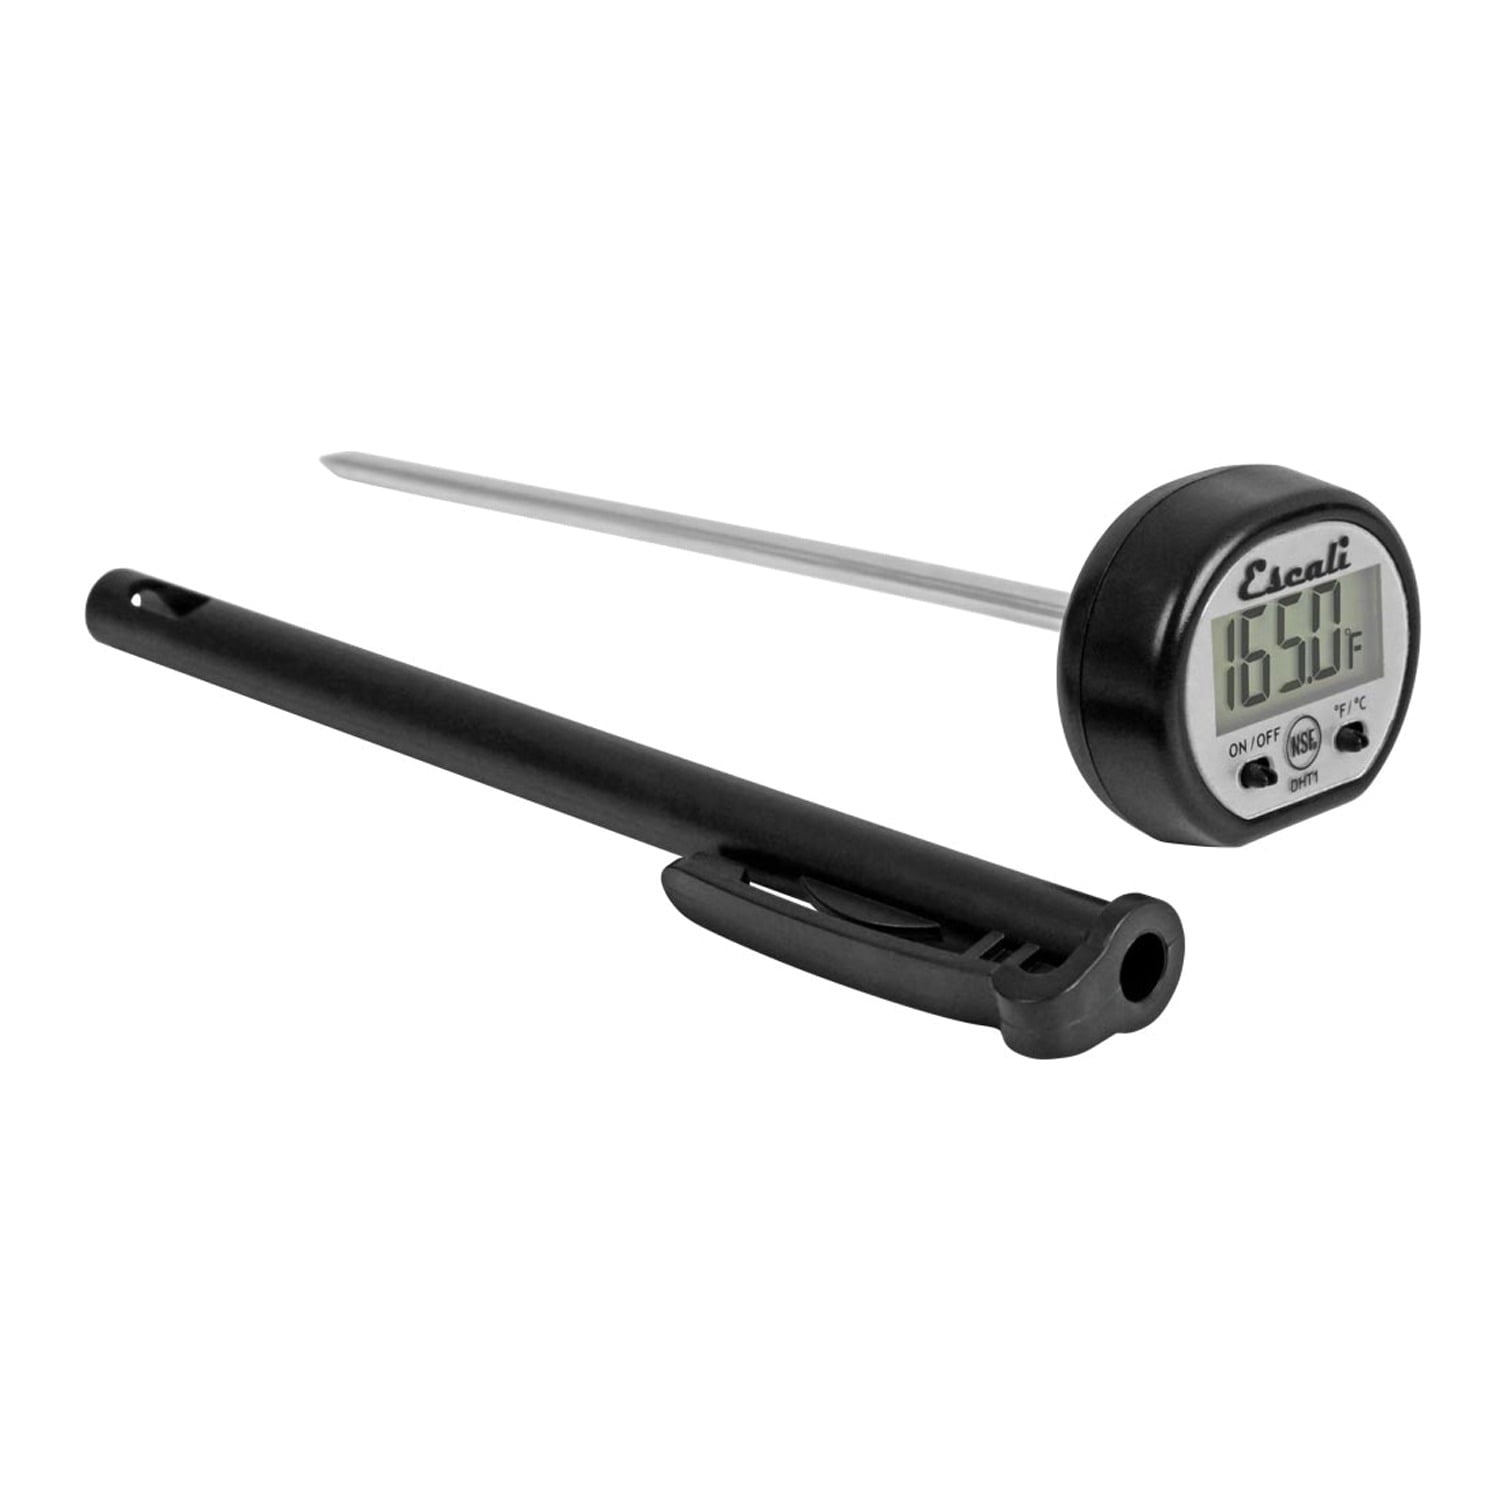 Stainless Probe Digital Thermometer w/ LCD Display & 5-Second Response Time 